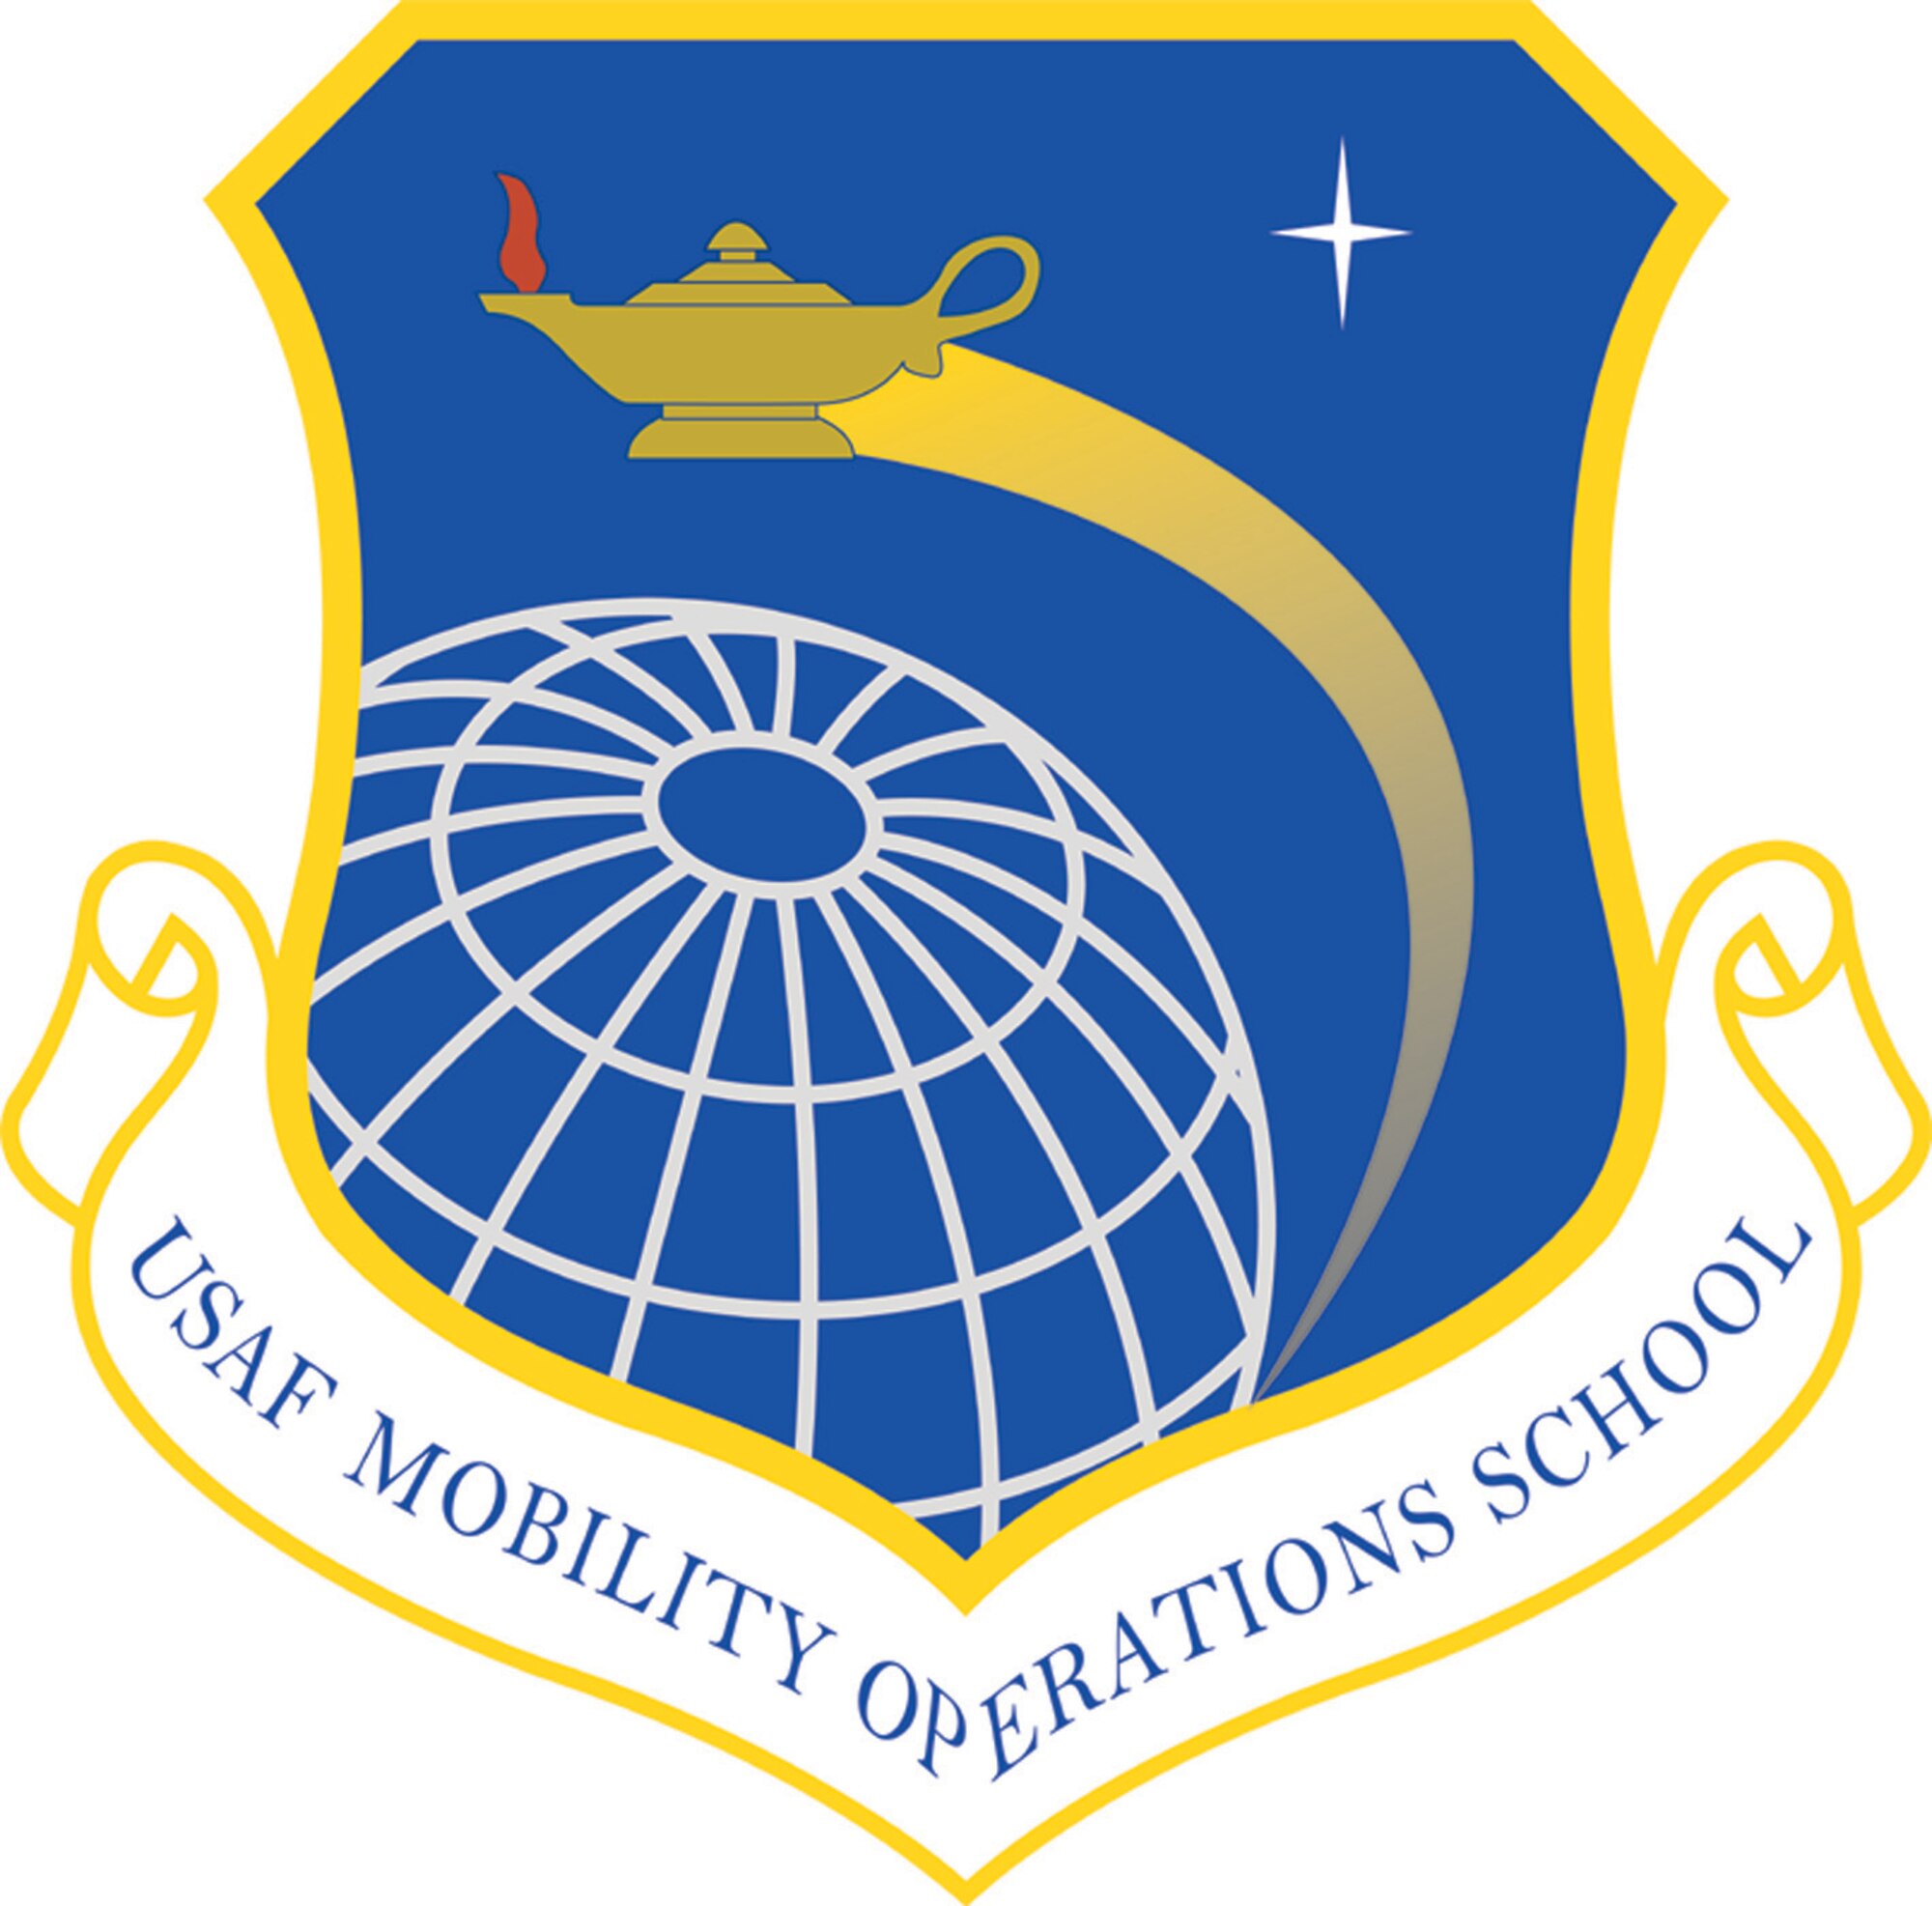 This is the official shield of the U.S. Air Force Expeditionary Center's Mobility Operations School. The U.S. Air Force Mobility Operations School (MOS) is the Air Force Center of Excellence dedicated to prepare every graduate to perform their mission by educating, training and exercising Department of Defense personnel in the full range of expeditionary operations. Using both resident and Web-based instructional media, the MOS offers 57 courses, including the Director of Mobility Forces Course and the Advanced Study of Air Mobility Intermediate Developmental Education and graduate program. Other courses cover topics in operations, tactics, intelligence, transportation, maintenance, aircrew resource management, and command and control from both a global and theater perspective. In addition, the MOS sponsors a range of exercises, including the futures wargame GLOMO, and the mobility piece of Joint Readiness Training at Fort Polk, La. Finally, the MOS is the USAF EC's focal point for instructor and curriculum development and student logistical support. (U.S. Air Force Expeditionary Center art illustration)
